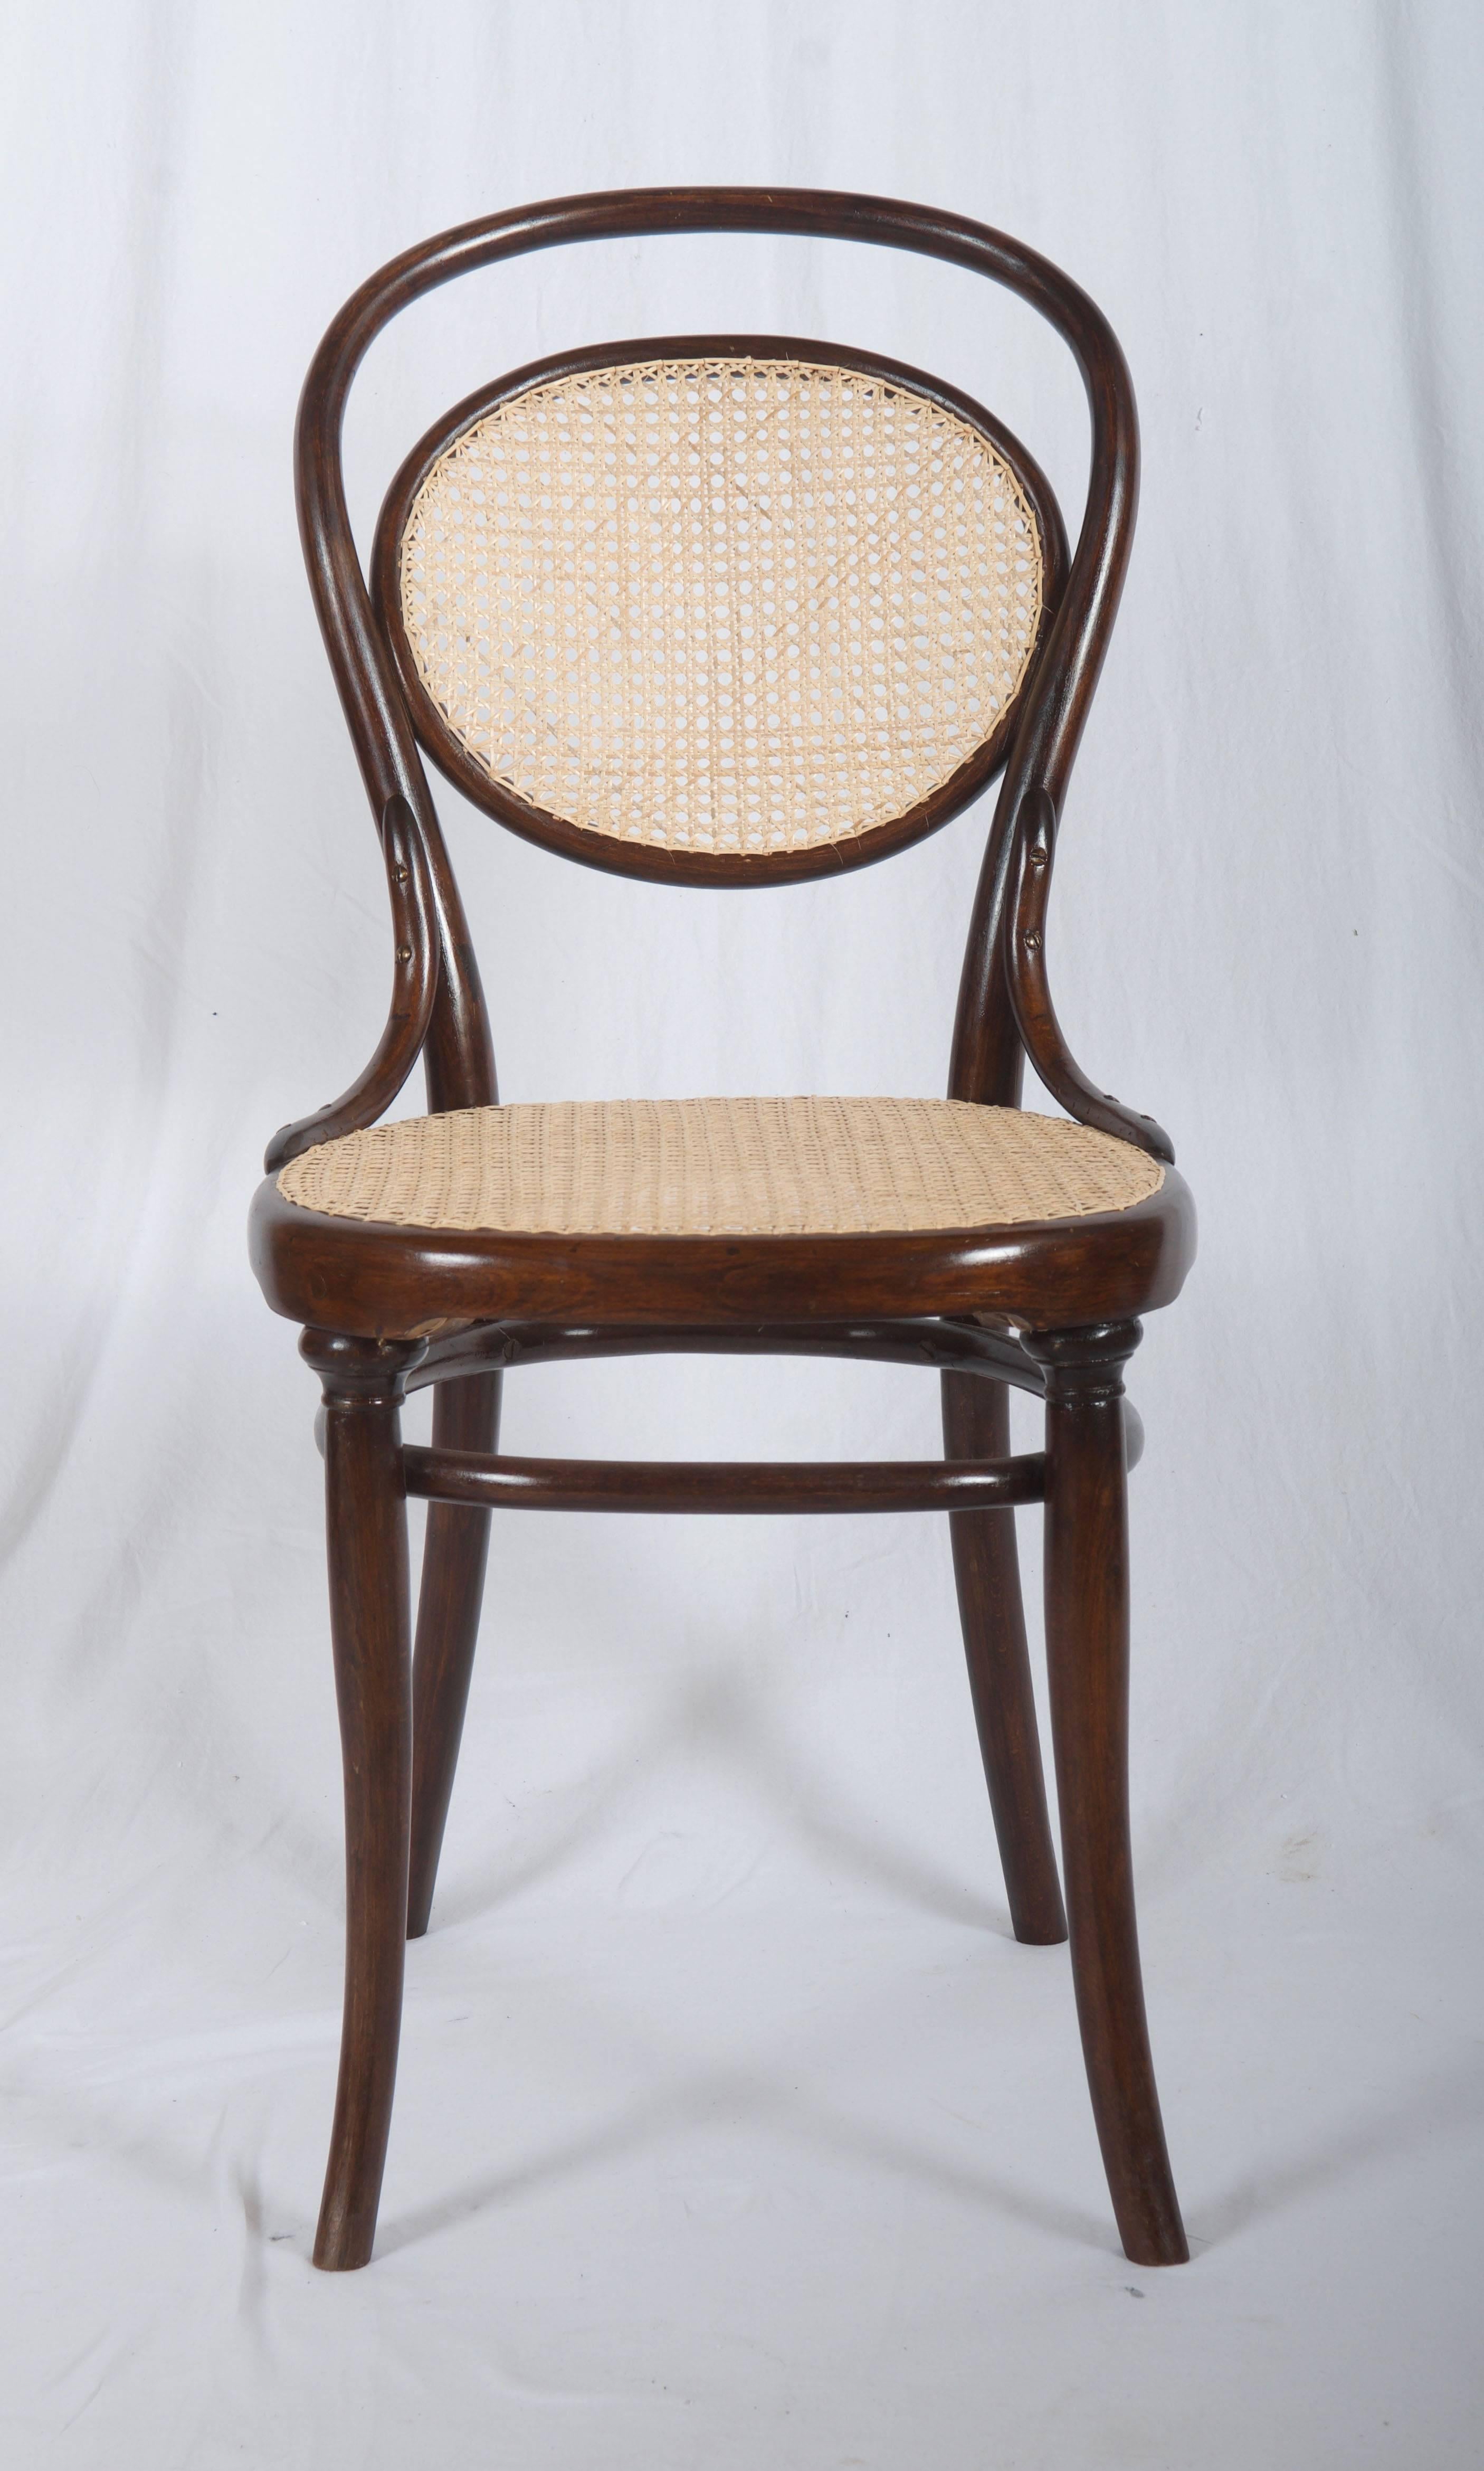 Beech bentwood with caned seat and backrest. Made in Austria by Gebrüder Thonet, circa 1890.
Fully restored.